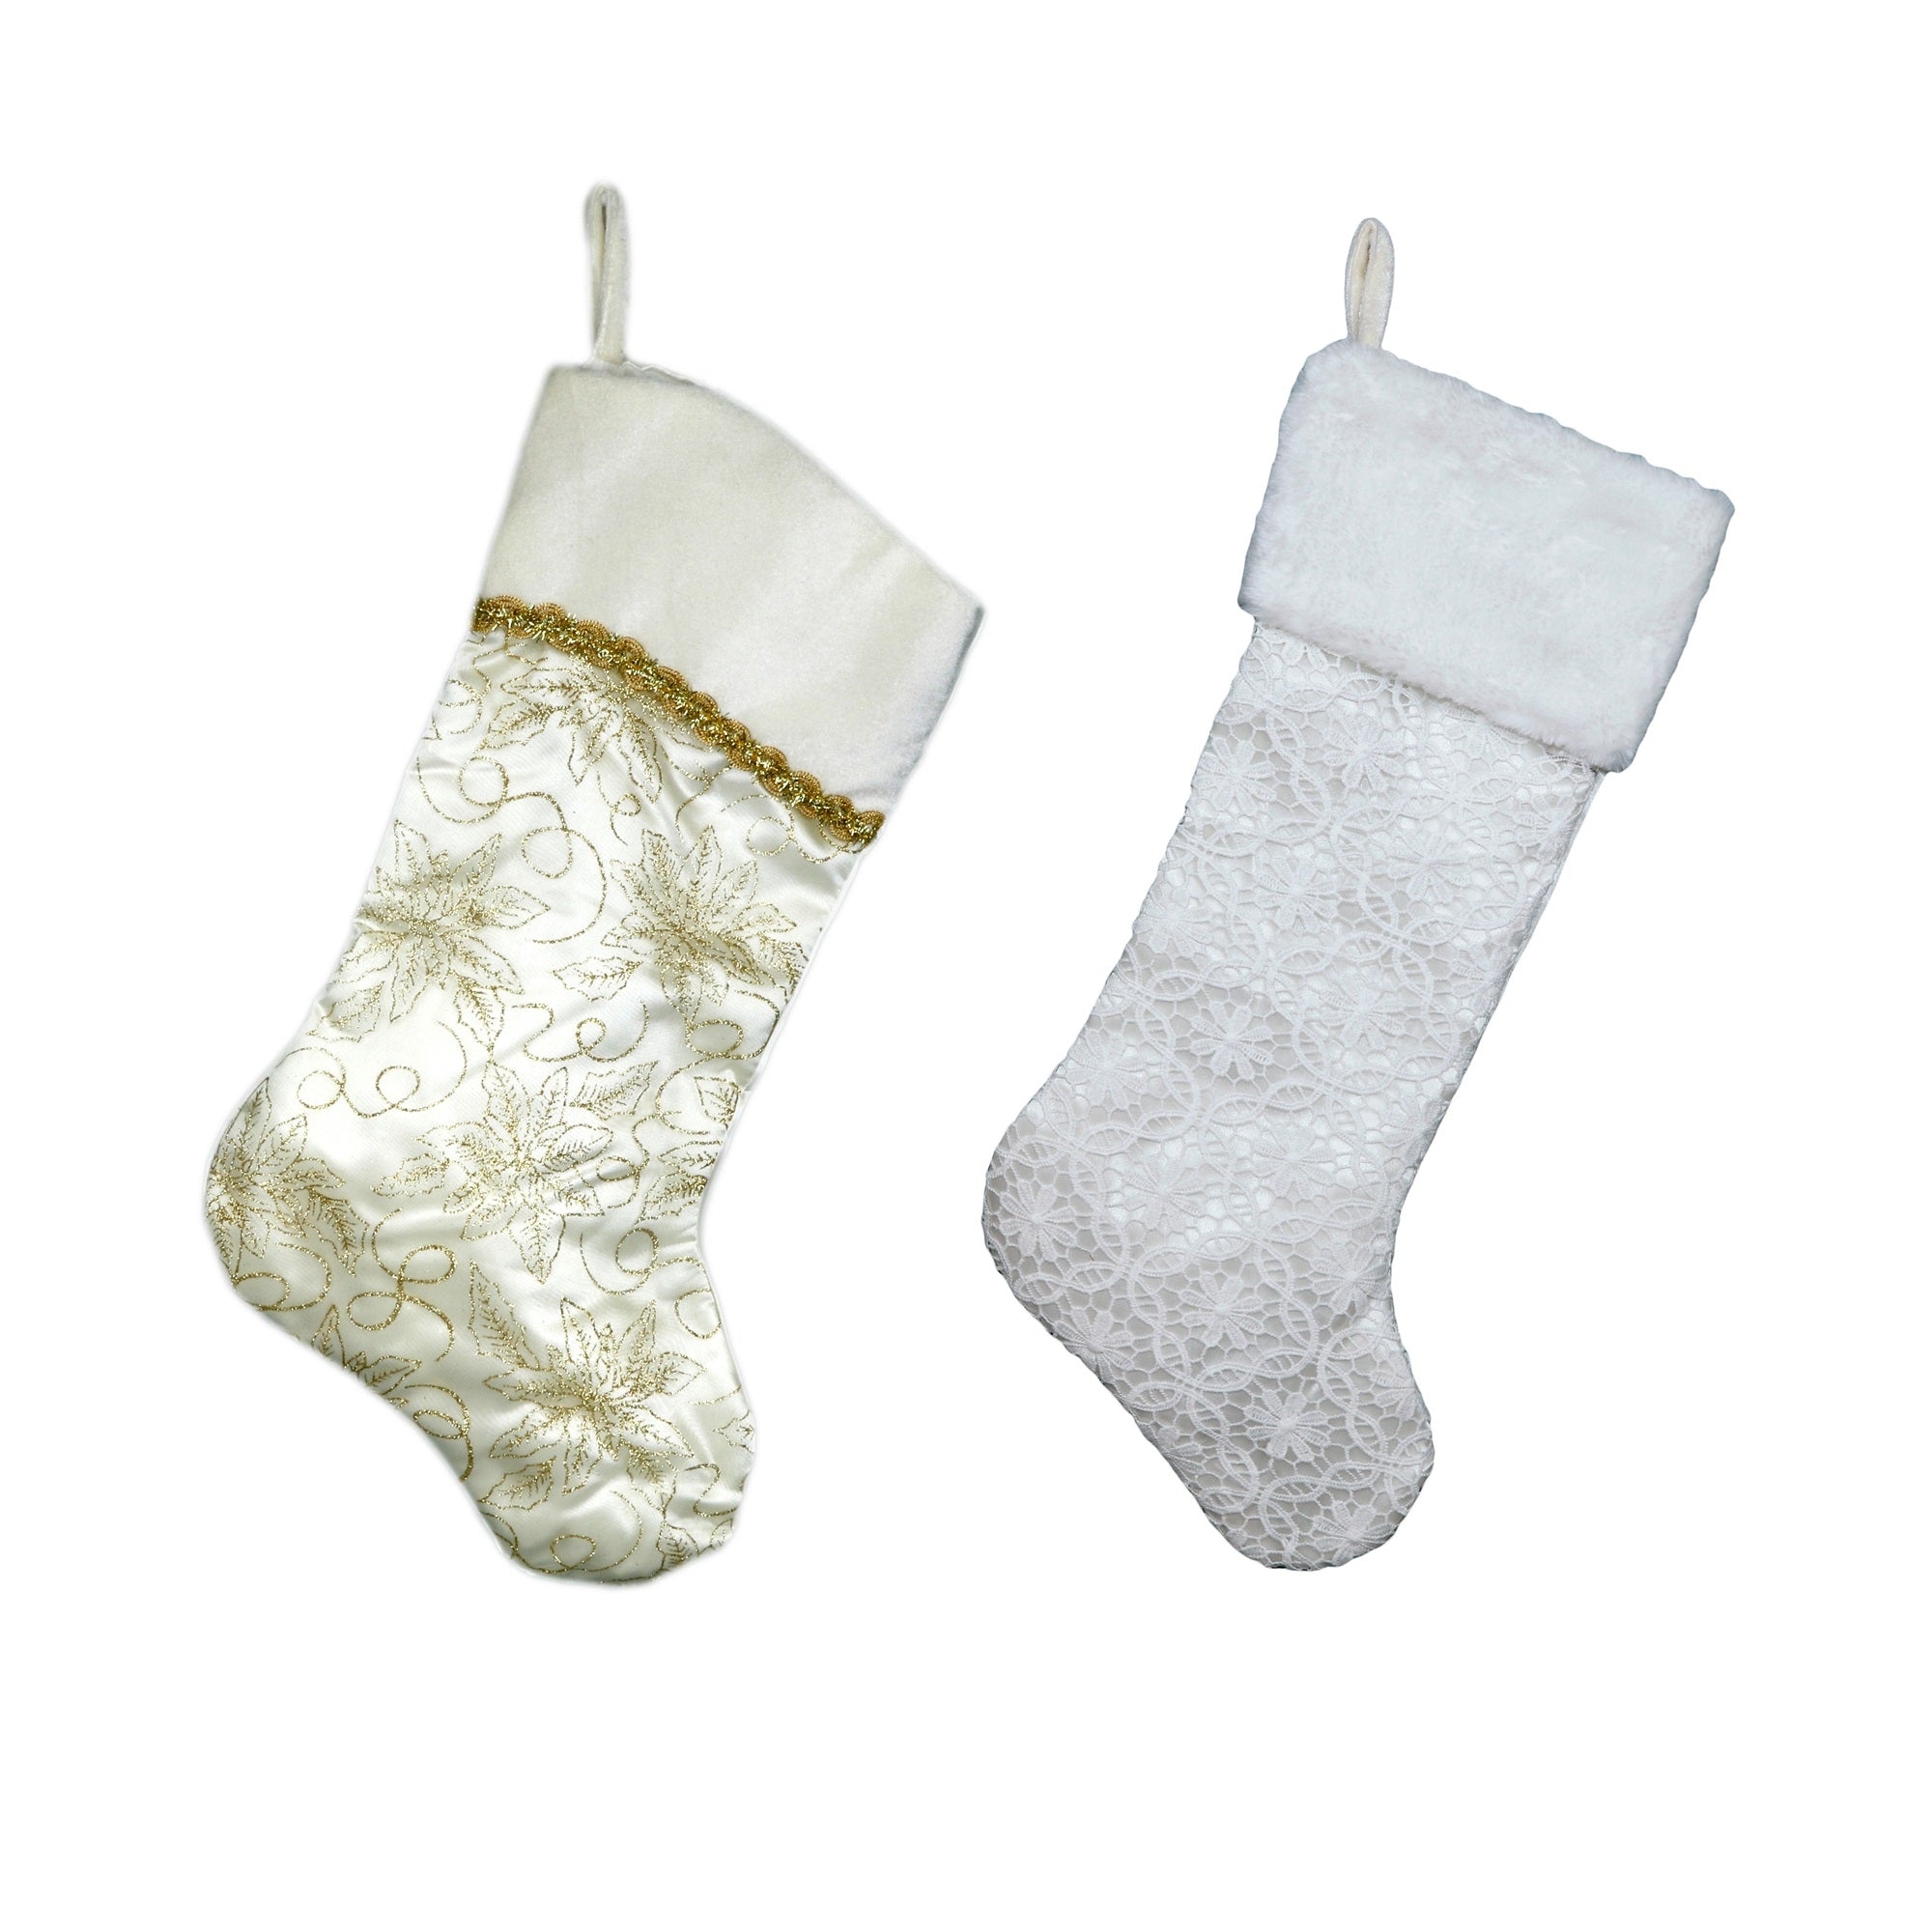 Long Hah Tai Embroidery Christmas Stockings, Assortment (Pack of 2)